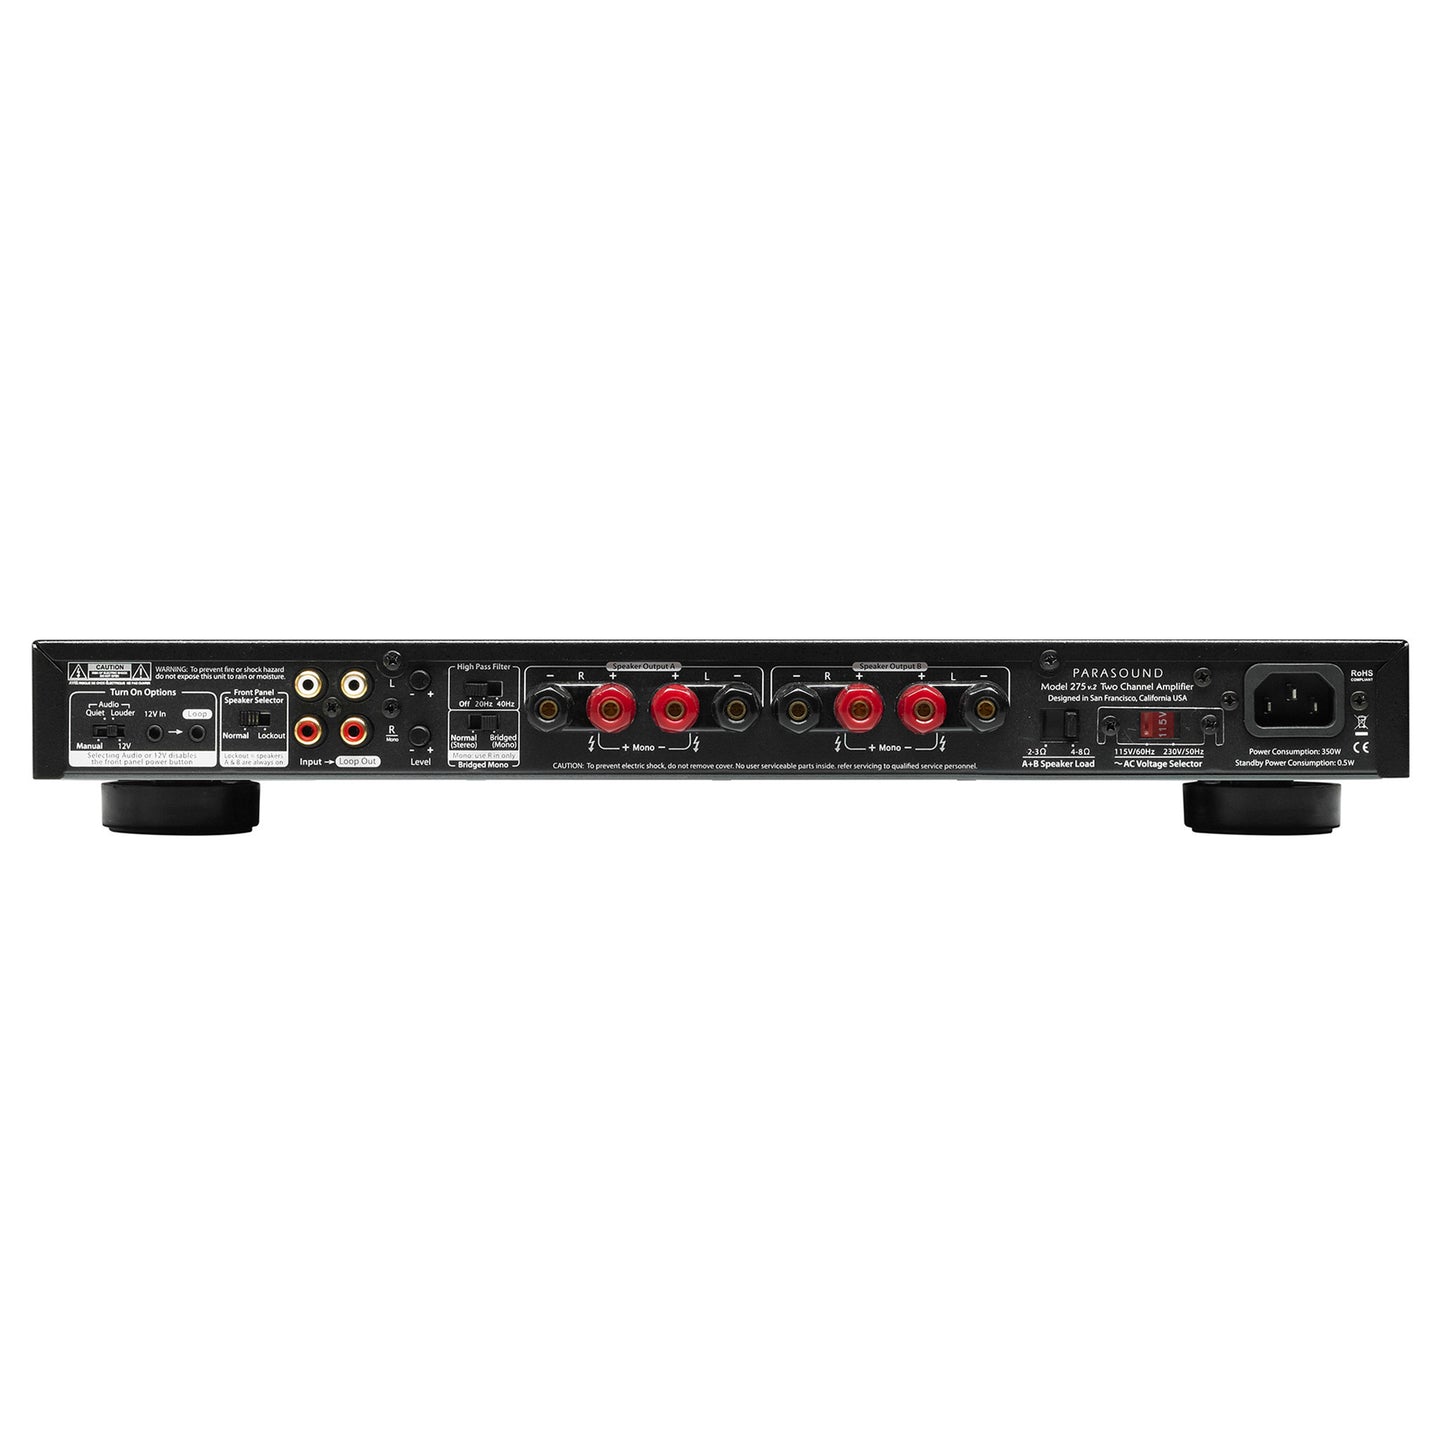 Parasound NewClassic 275 v.2 Stereo Power Amplifier